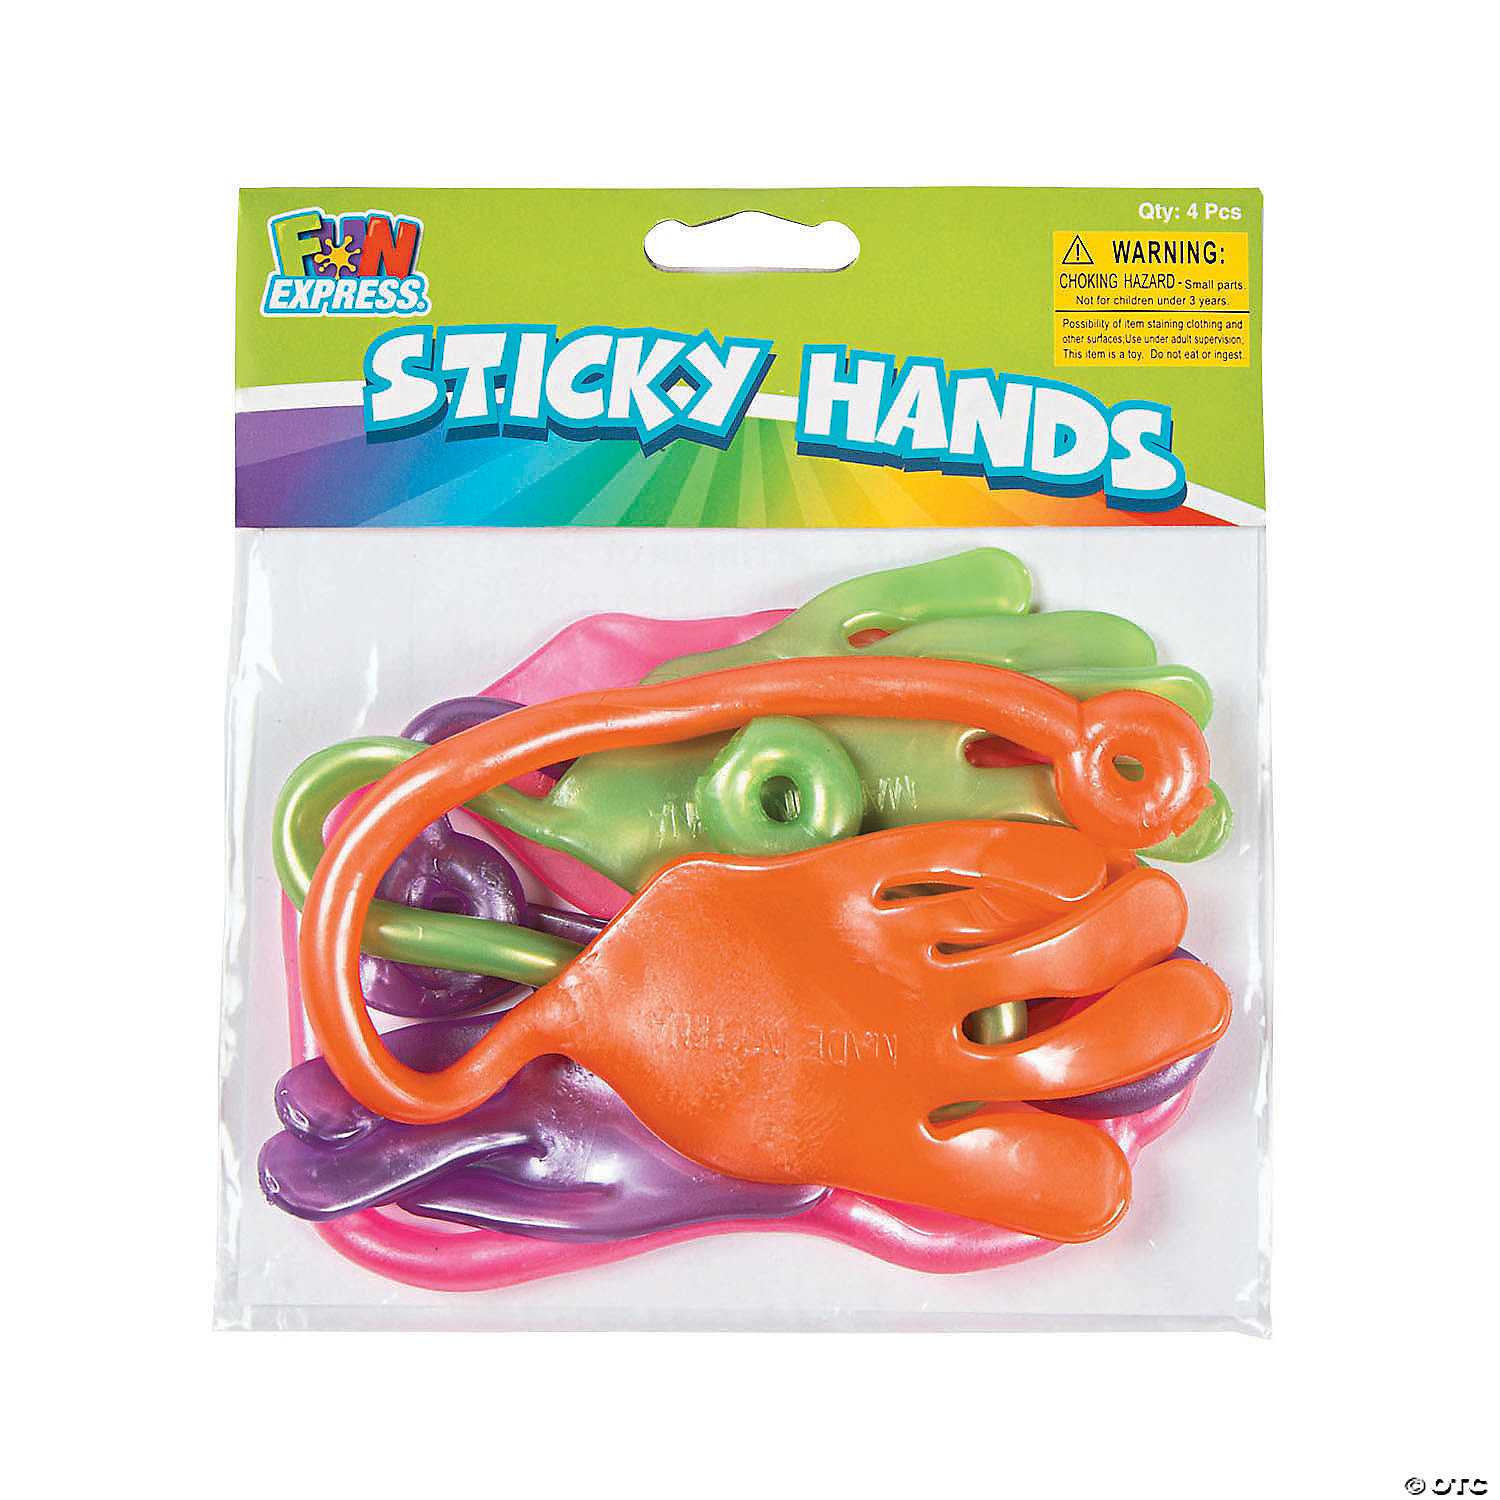 Glitter Sticky Hands - Bulk Pack of 72, Assorted Colored Stretchy